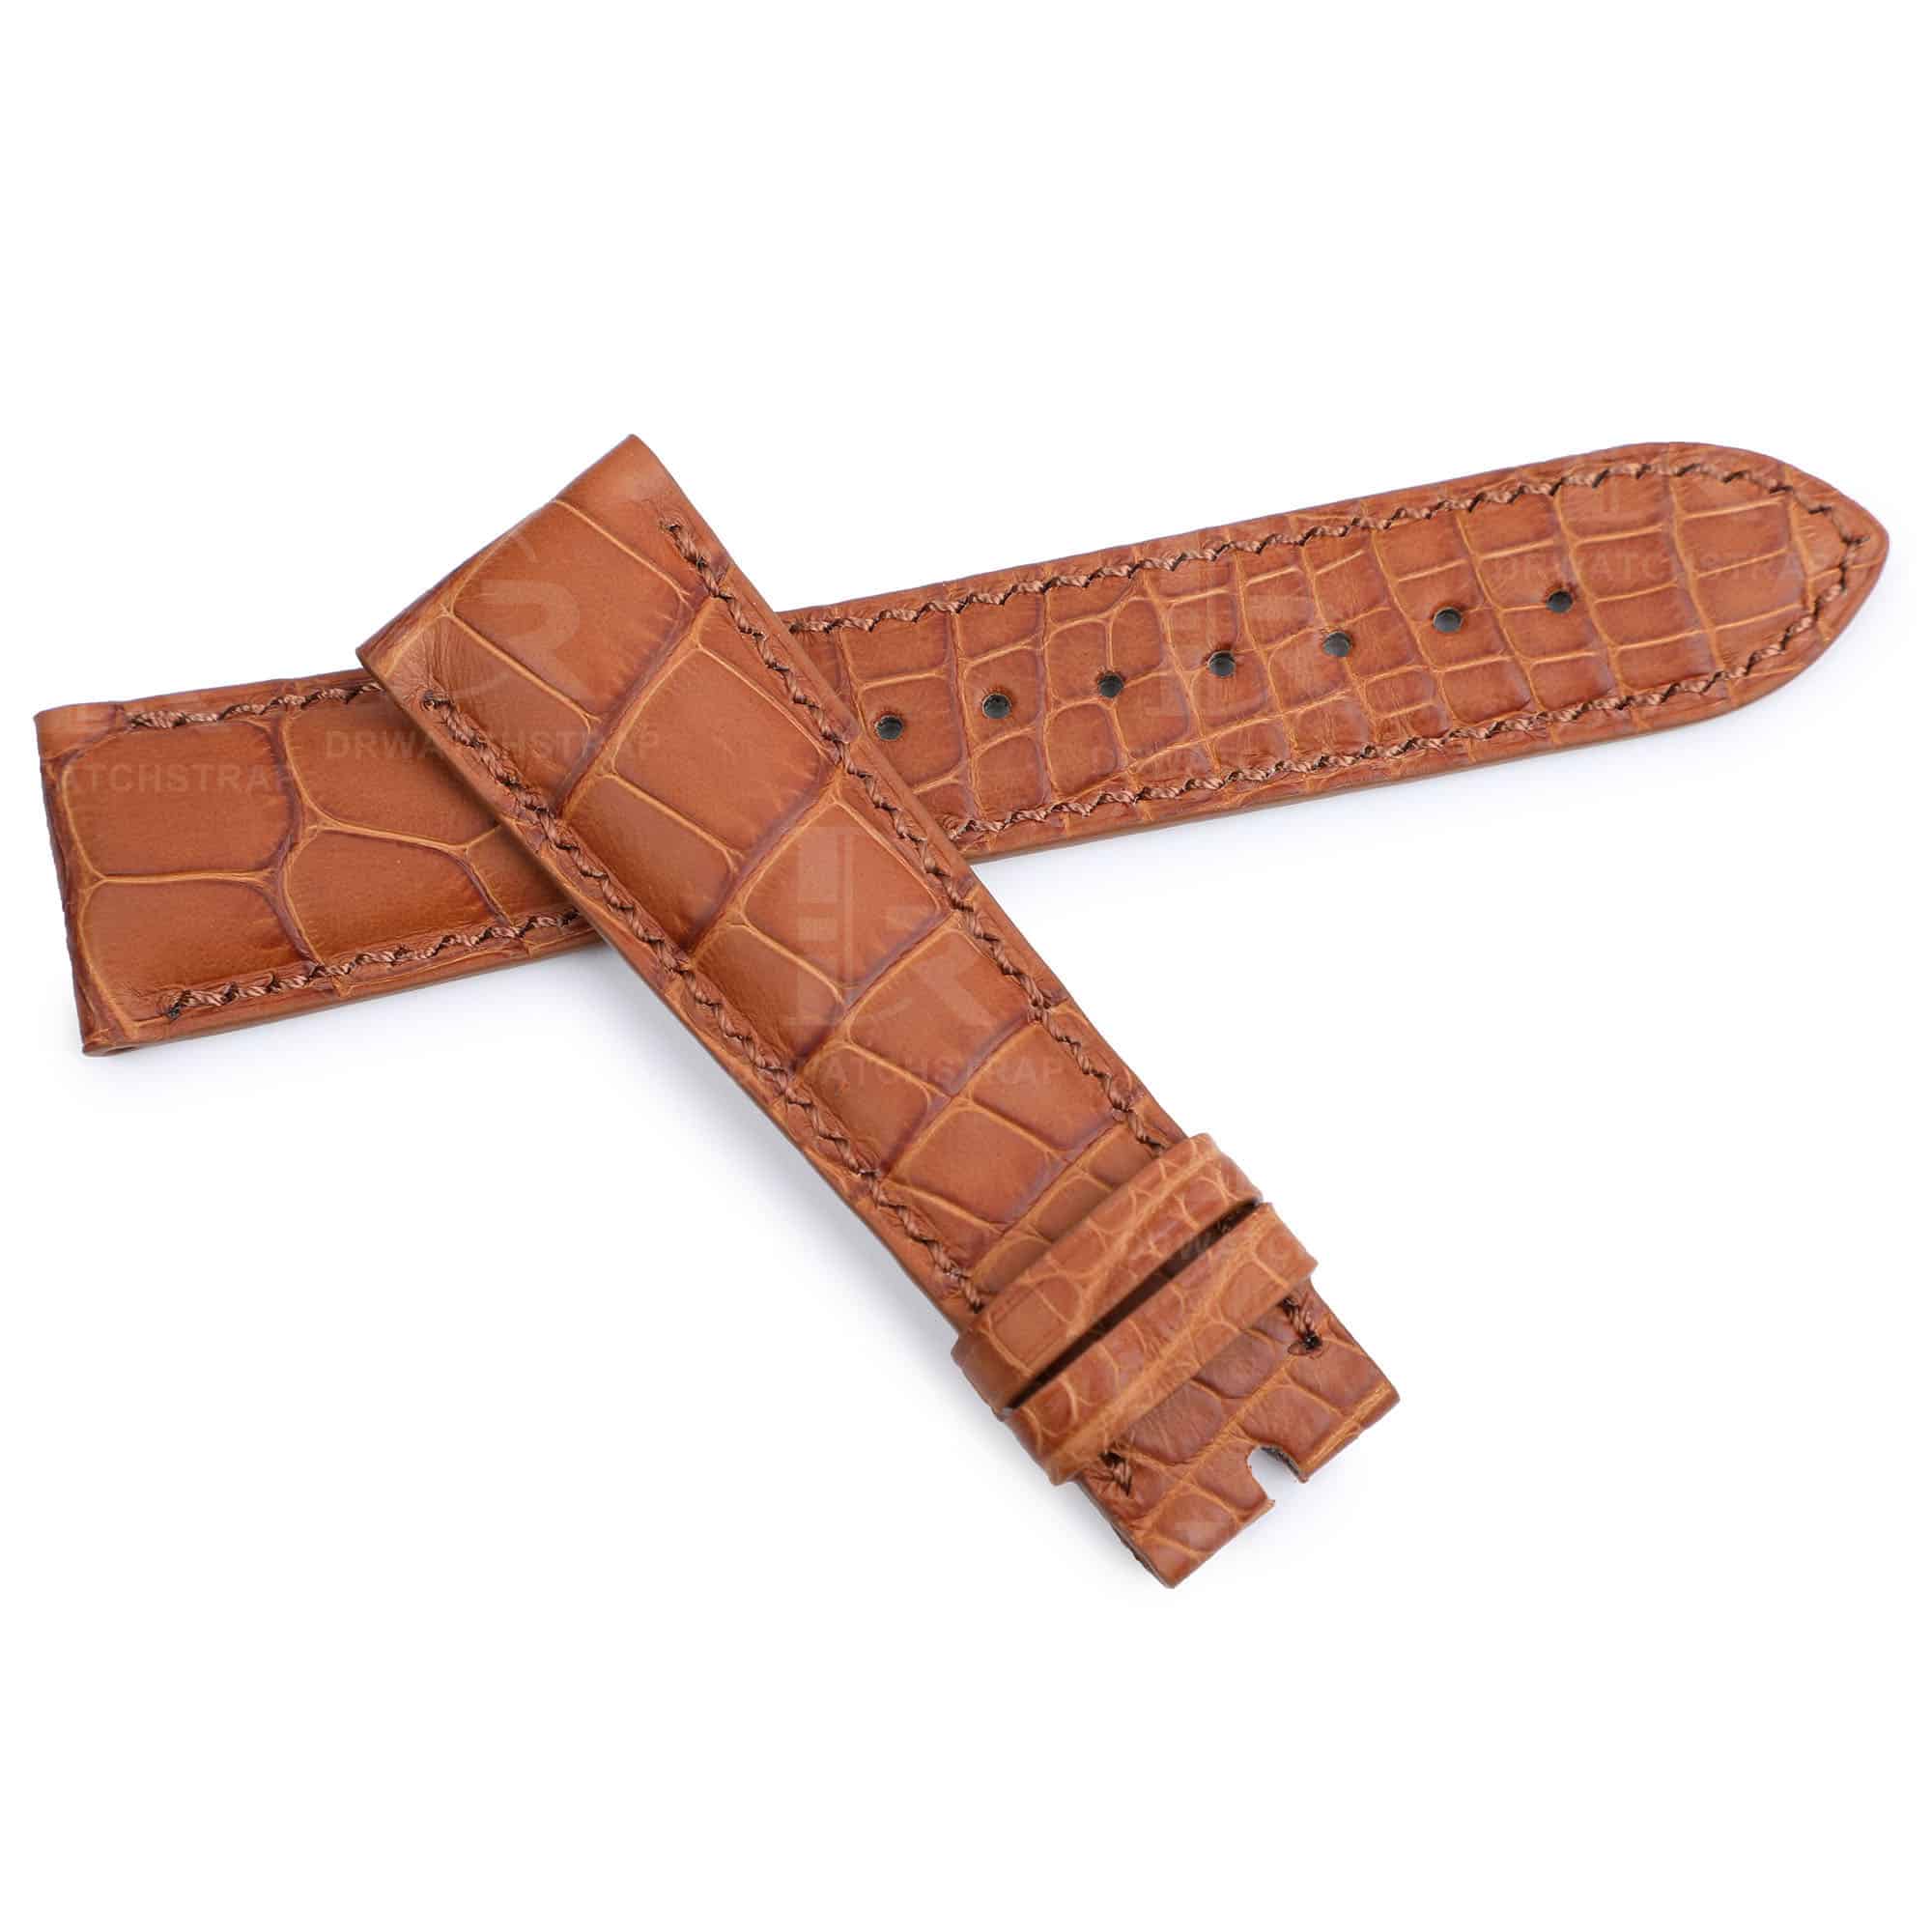 Custom handmade replacement Belly-Scale brown alligator leather watchband for Chopard LUC straps